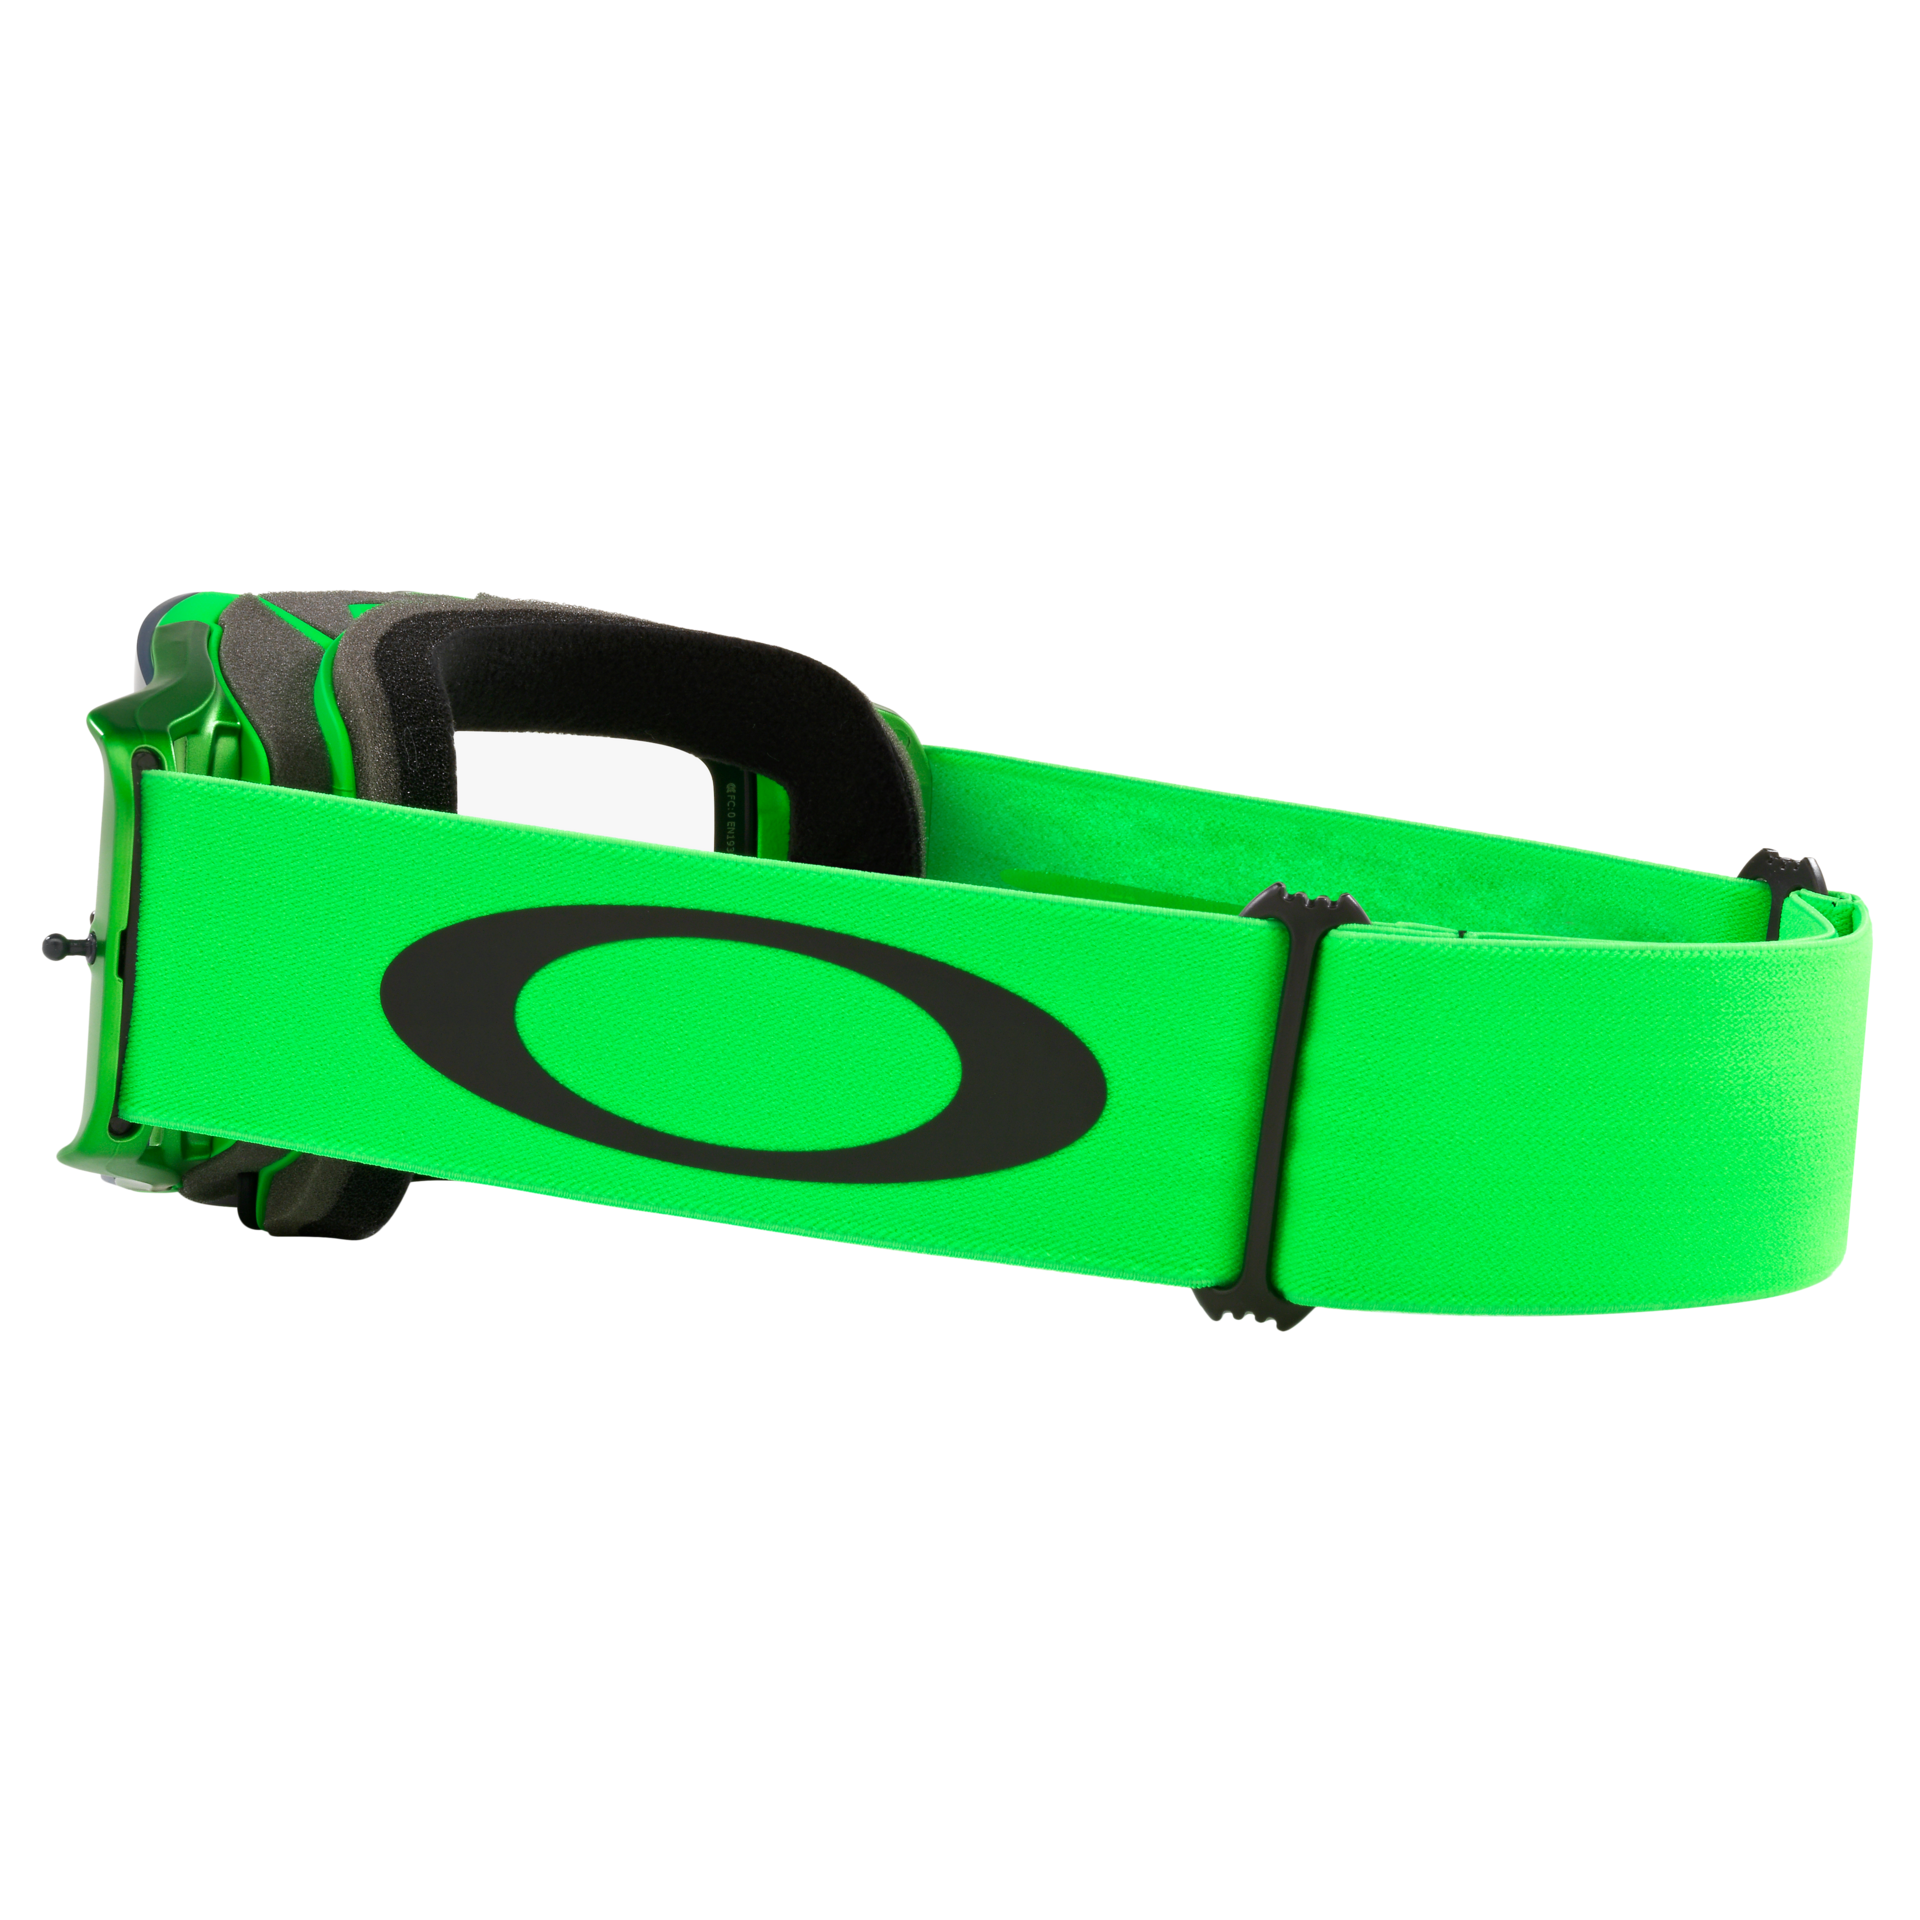 Oakley Front Line MX Goggle Moto Green - Clear Lens